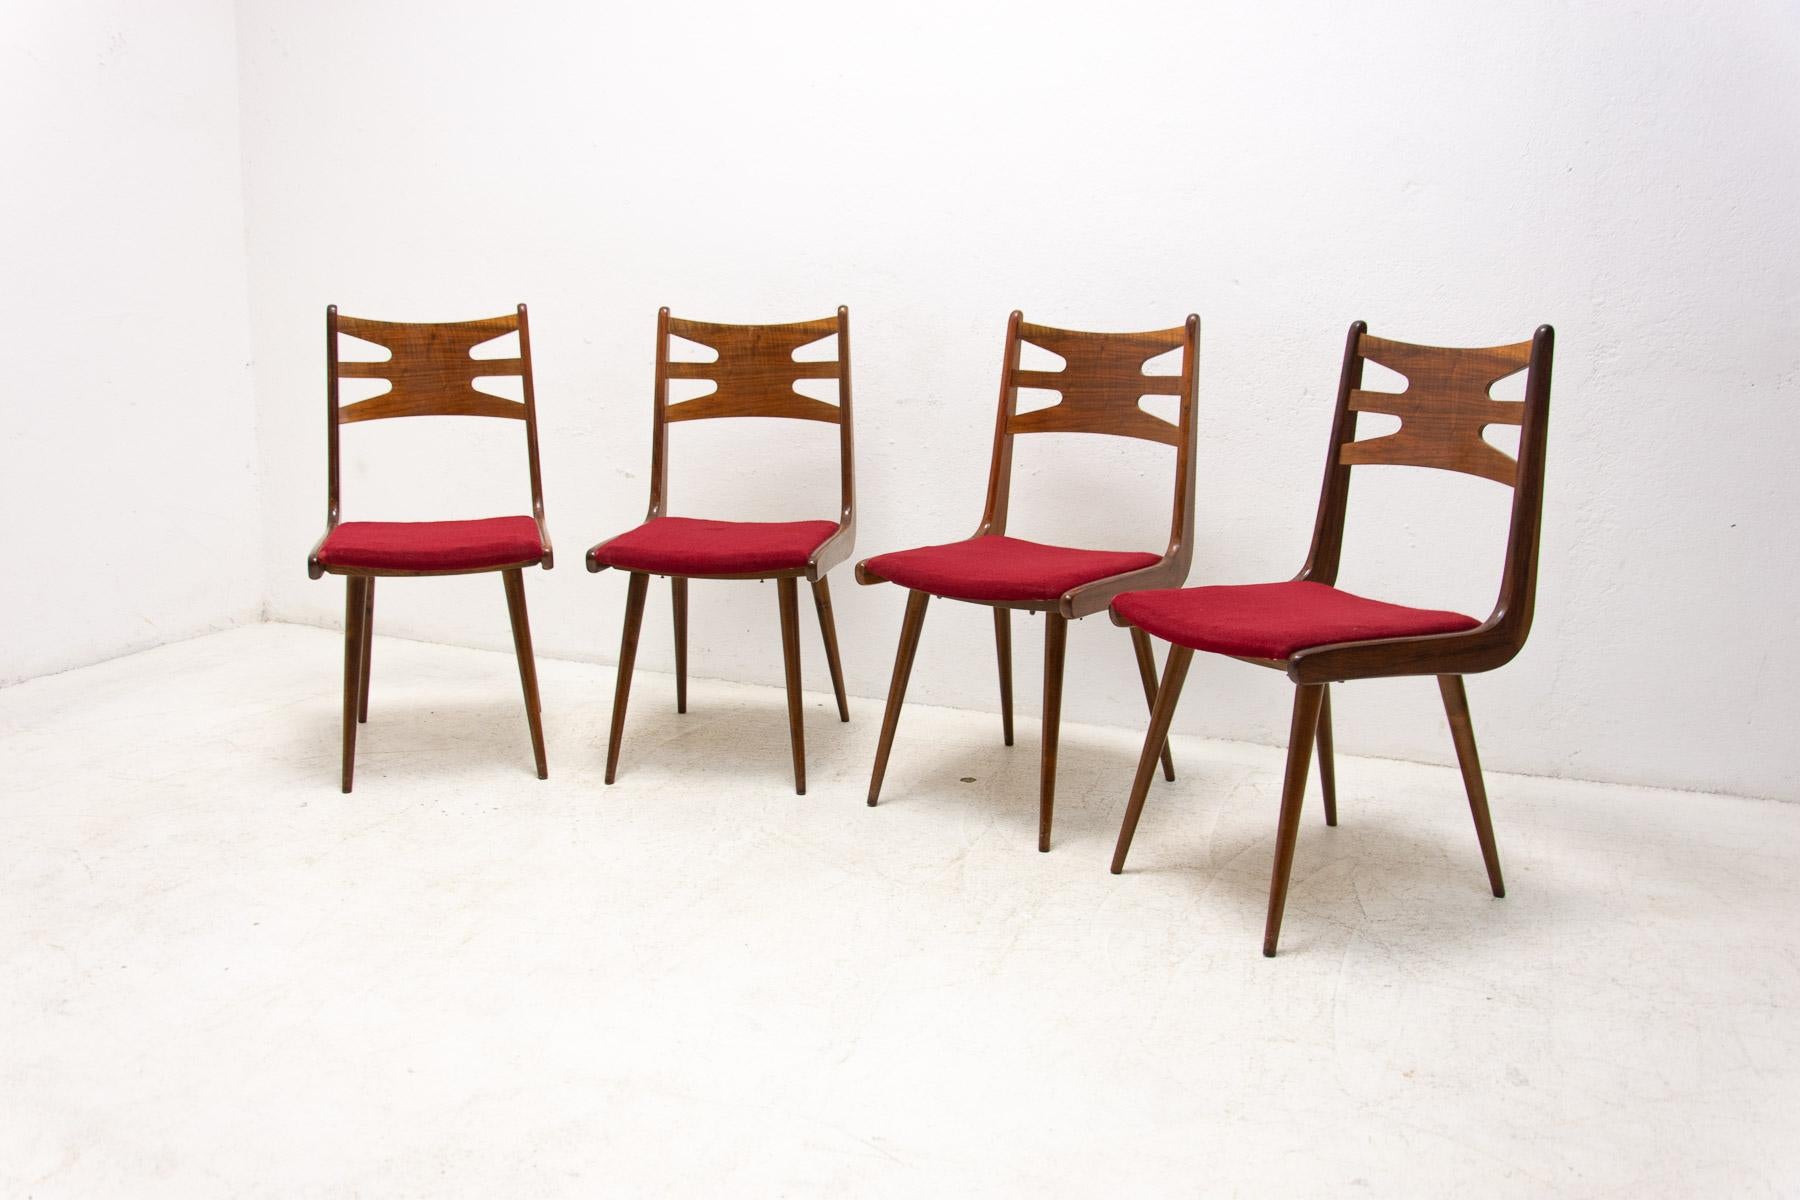 20th Century Set of Upholstered Walnut Dining Chairs, 1970s, Czechoslovakia